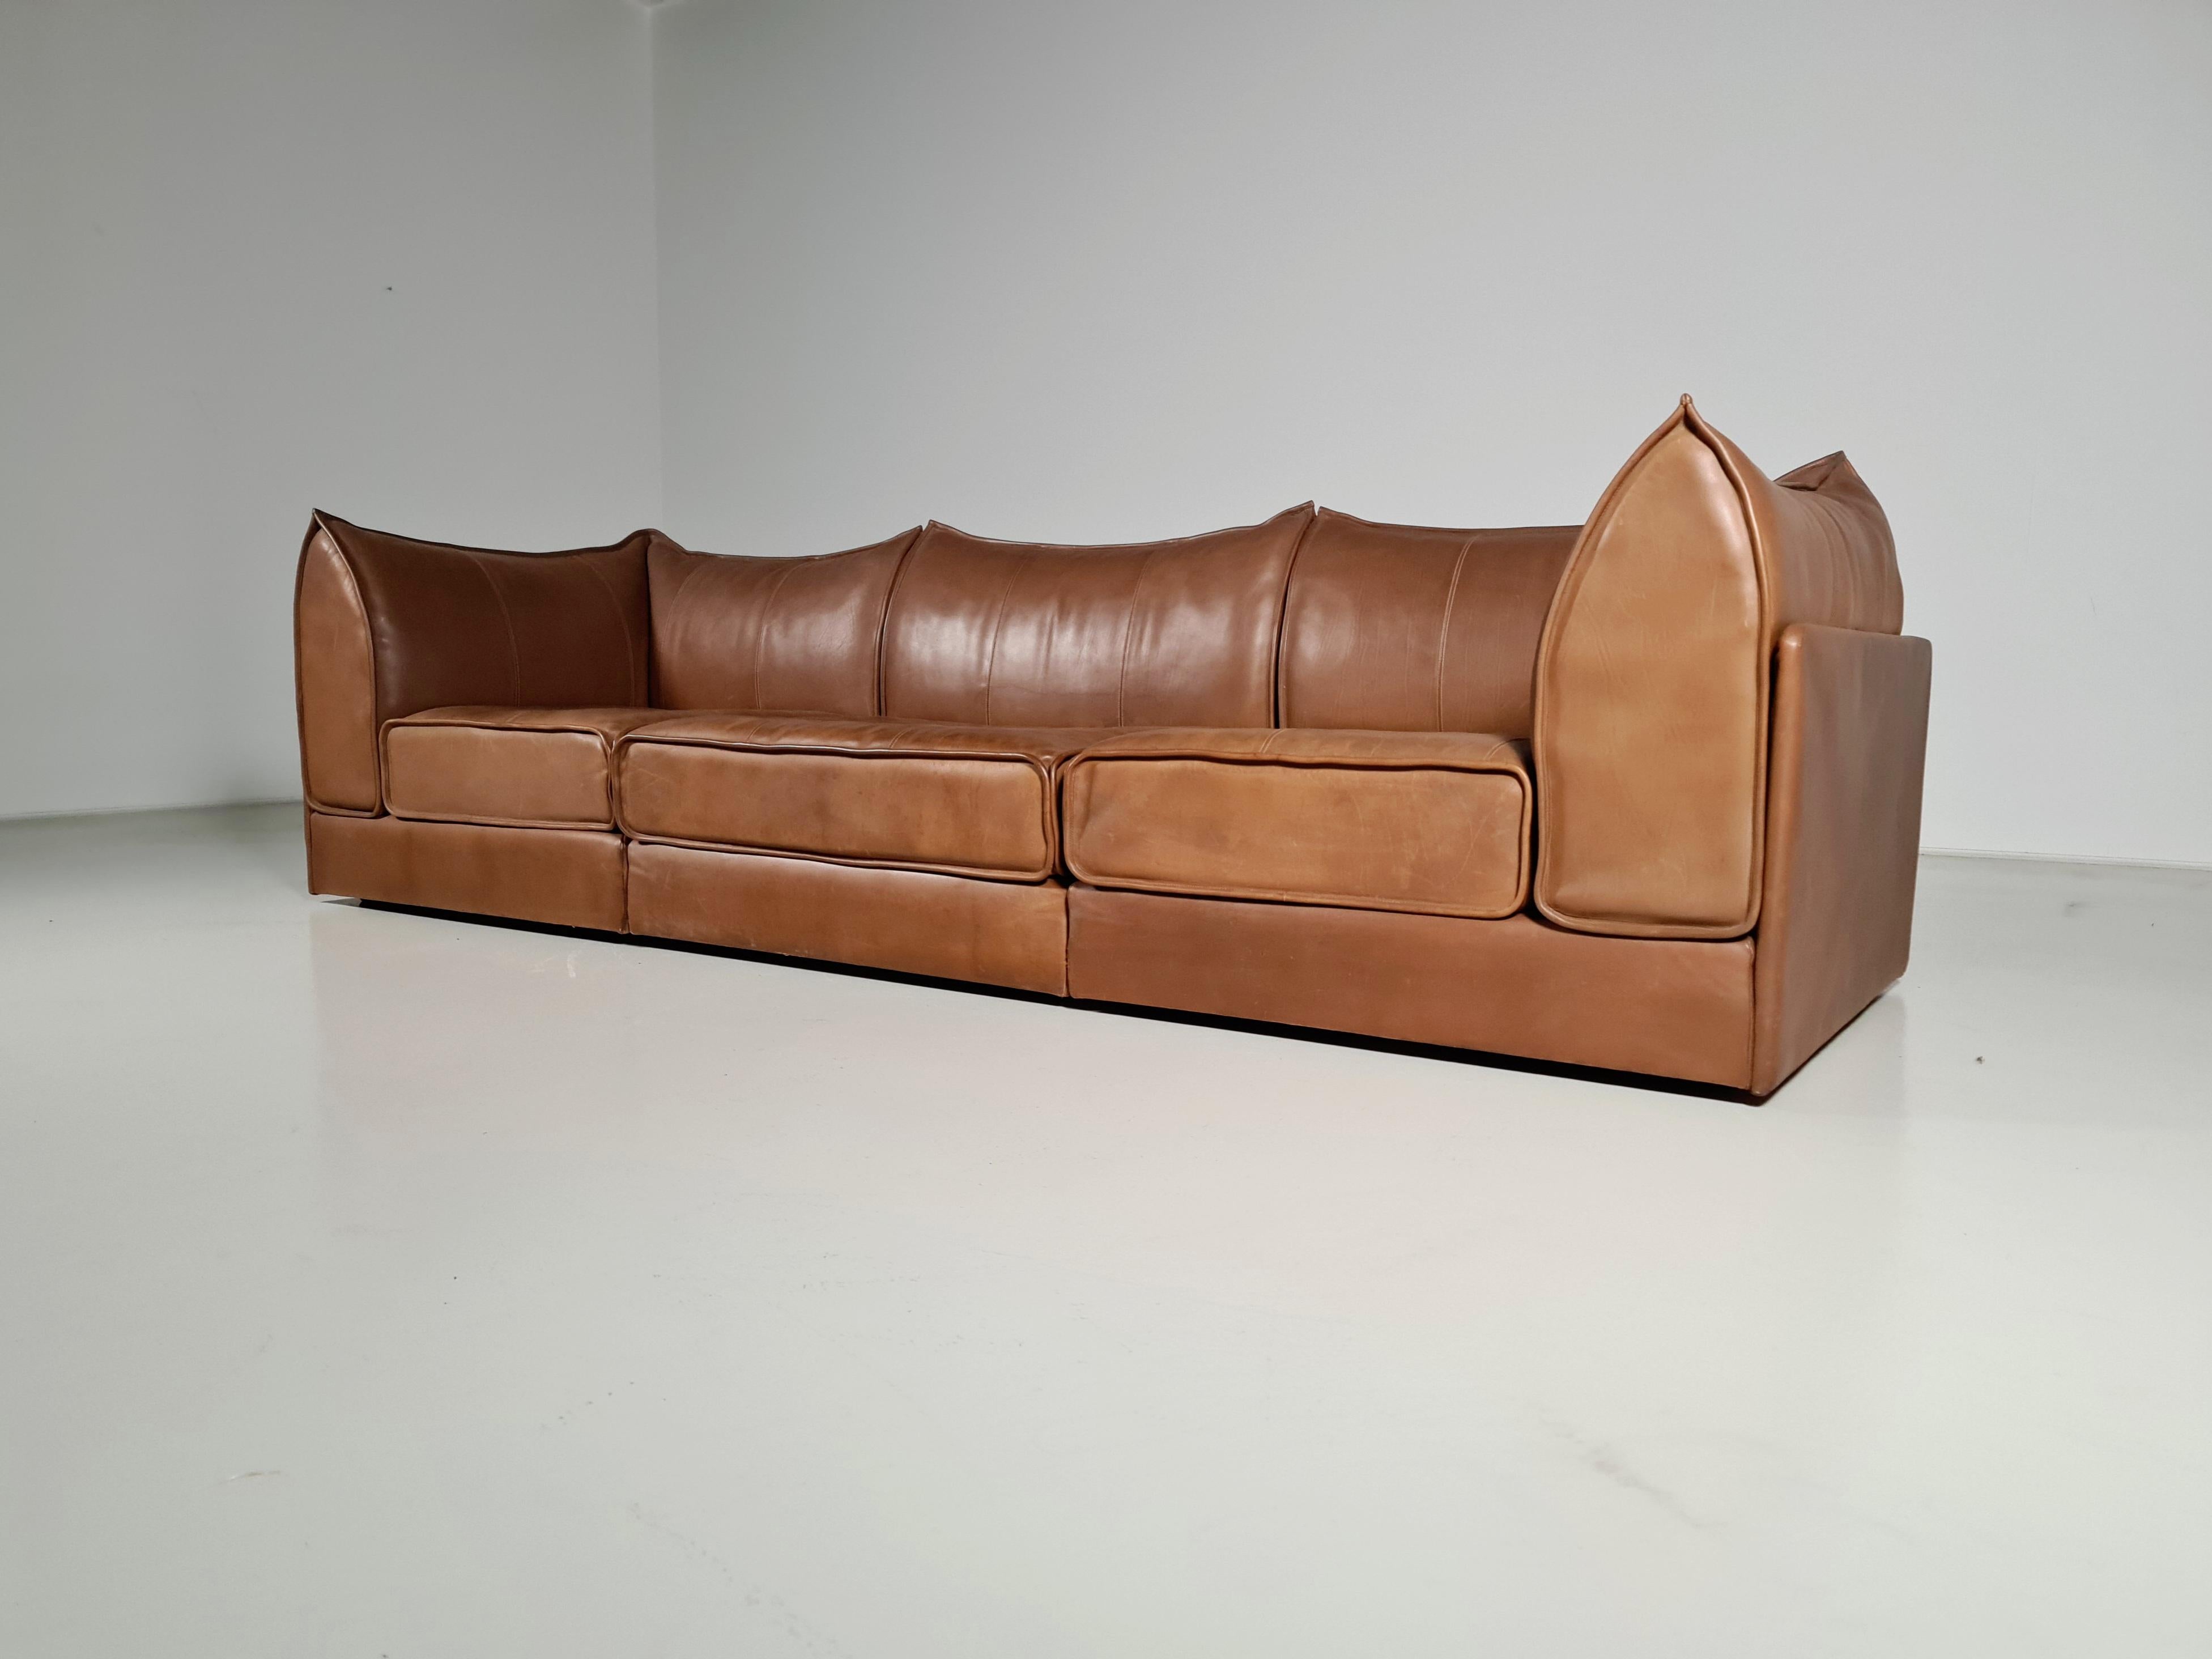 Rare De Sede Ds-19 modular sofa. Also known as the De Sede 'Pagoda'sofa. The sofa is in original condition and the leather shows a nice patina. The high quality, thick buffalo leather has aged beautifully, which will continue to develop over the